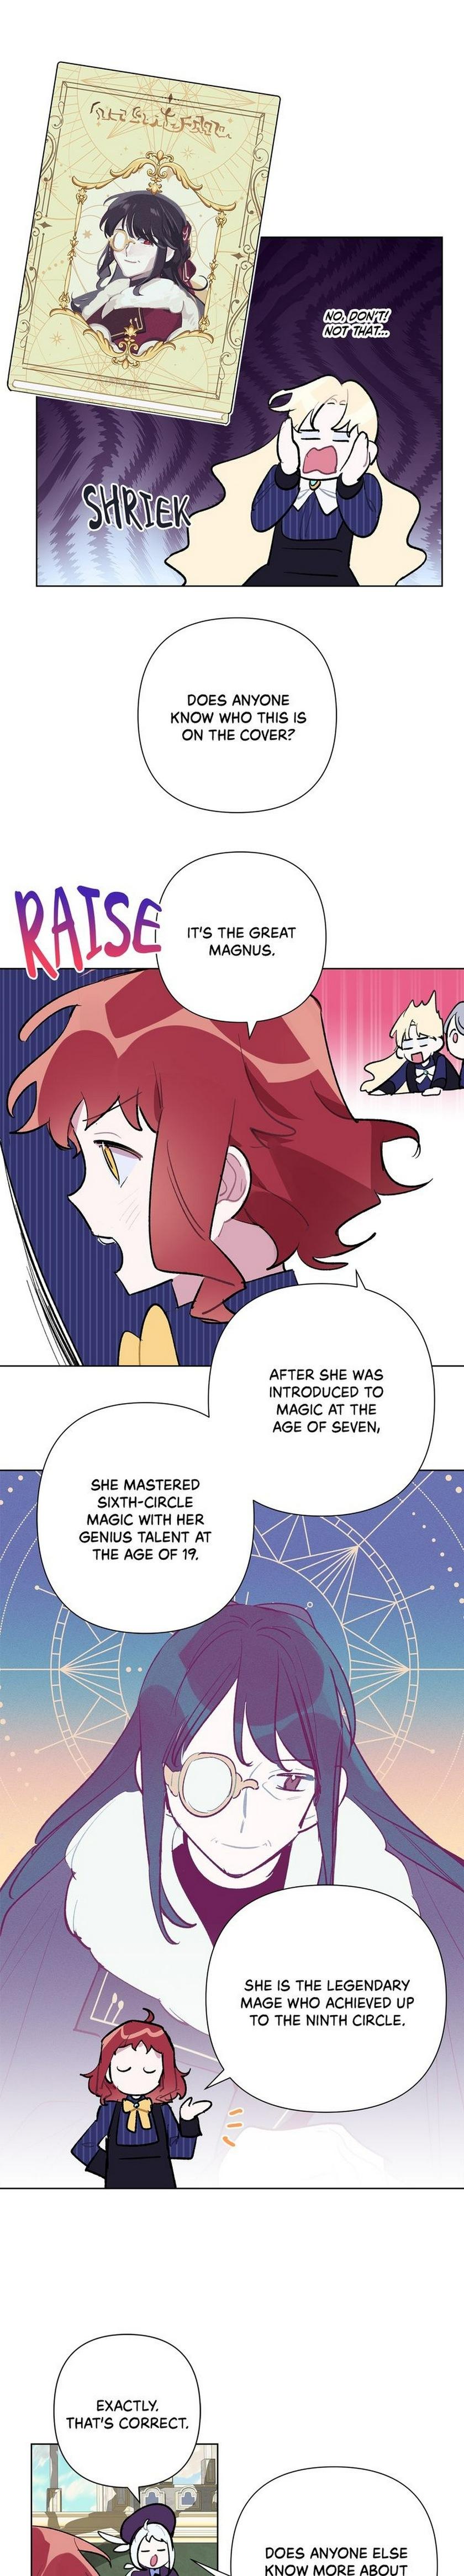 The Way the Mage Faces Death chapter 30